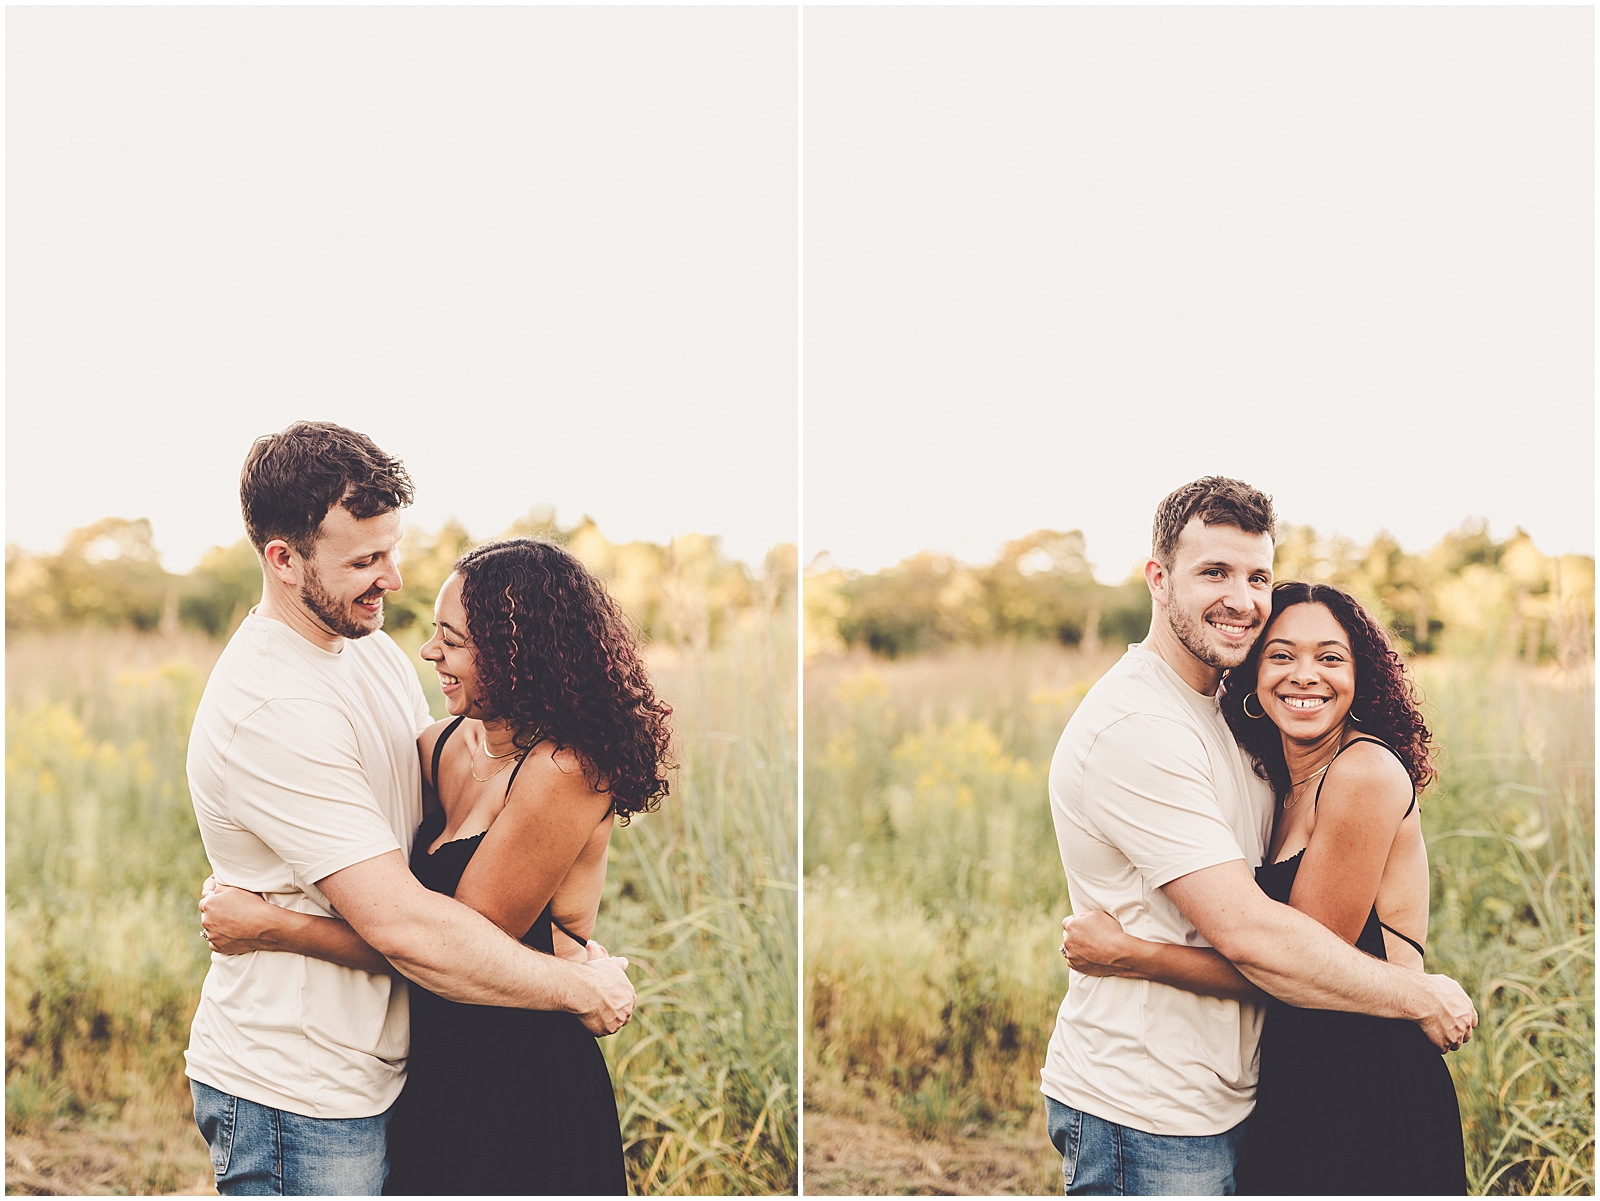 Autumn & Michael's anniversary session at the Kankakee River State Park with Chicagoland wedding photographer Kara Evans Photographer.